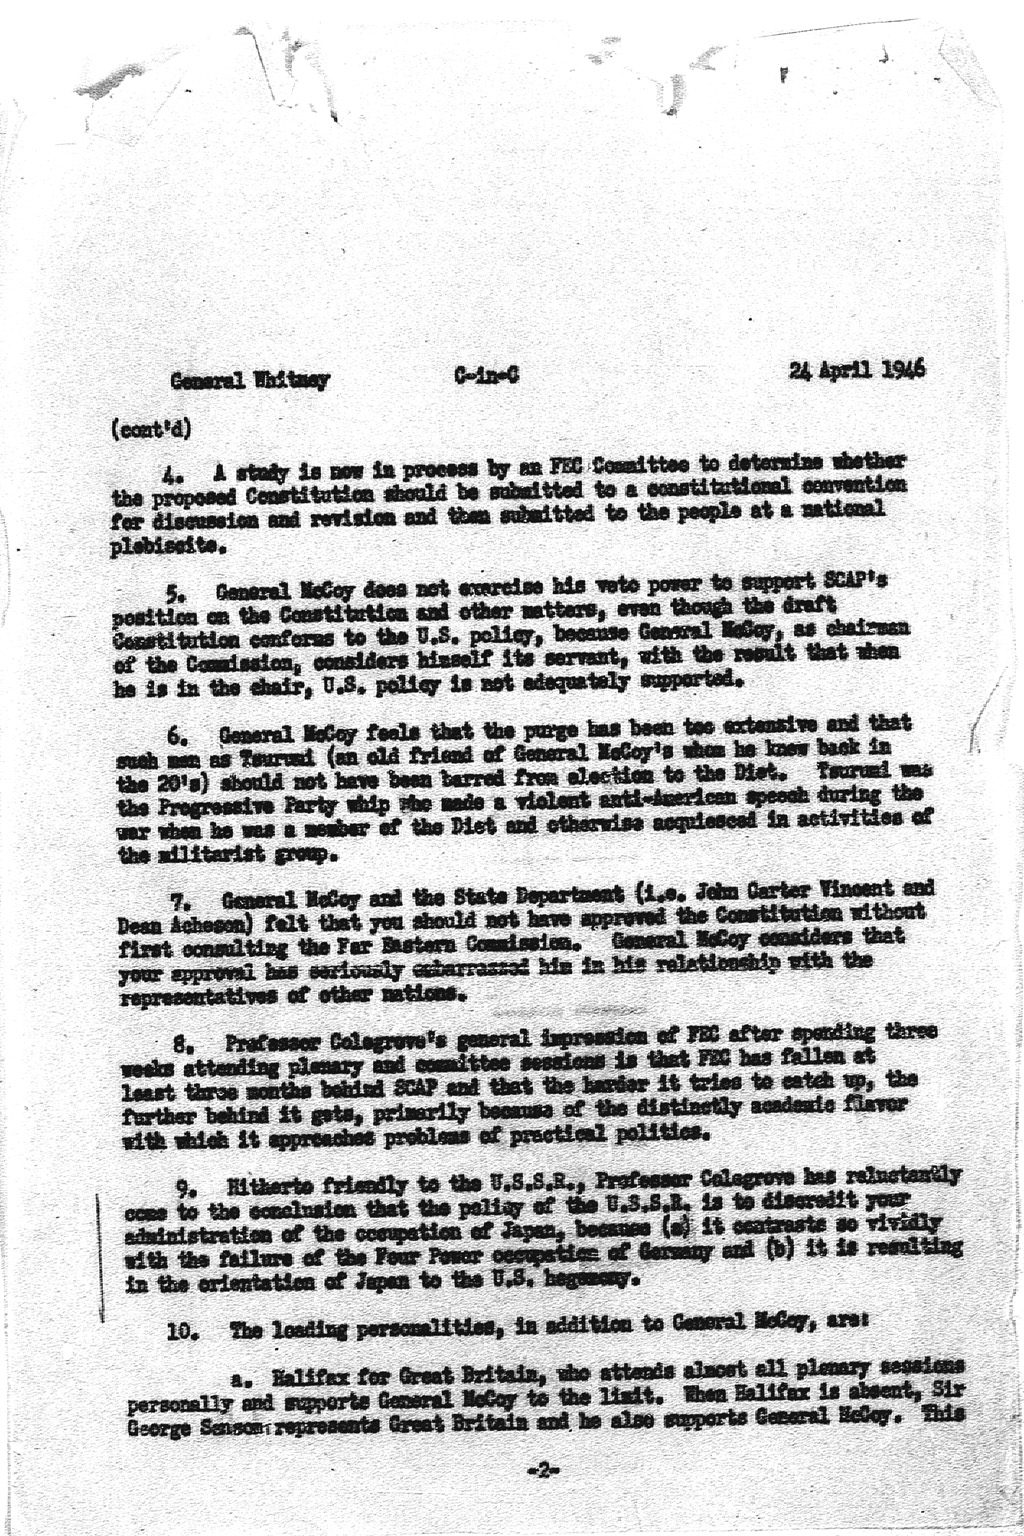 『General Whitney to C-in-C, dated 24 April 1946 re discussion on 22 April 1946 with Professor Colegrove』(拡大画像)